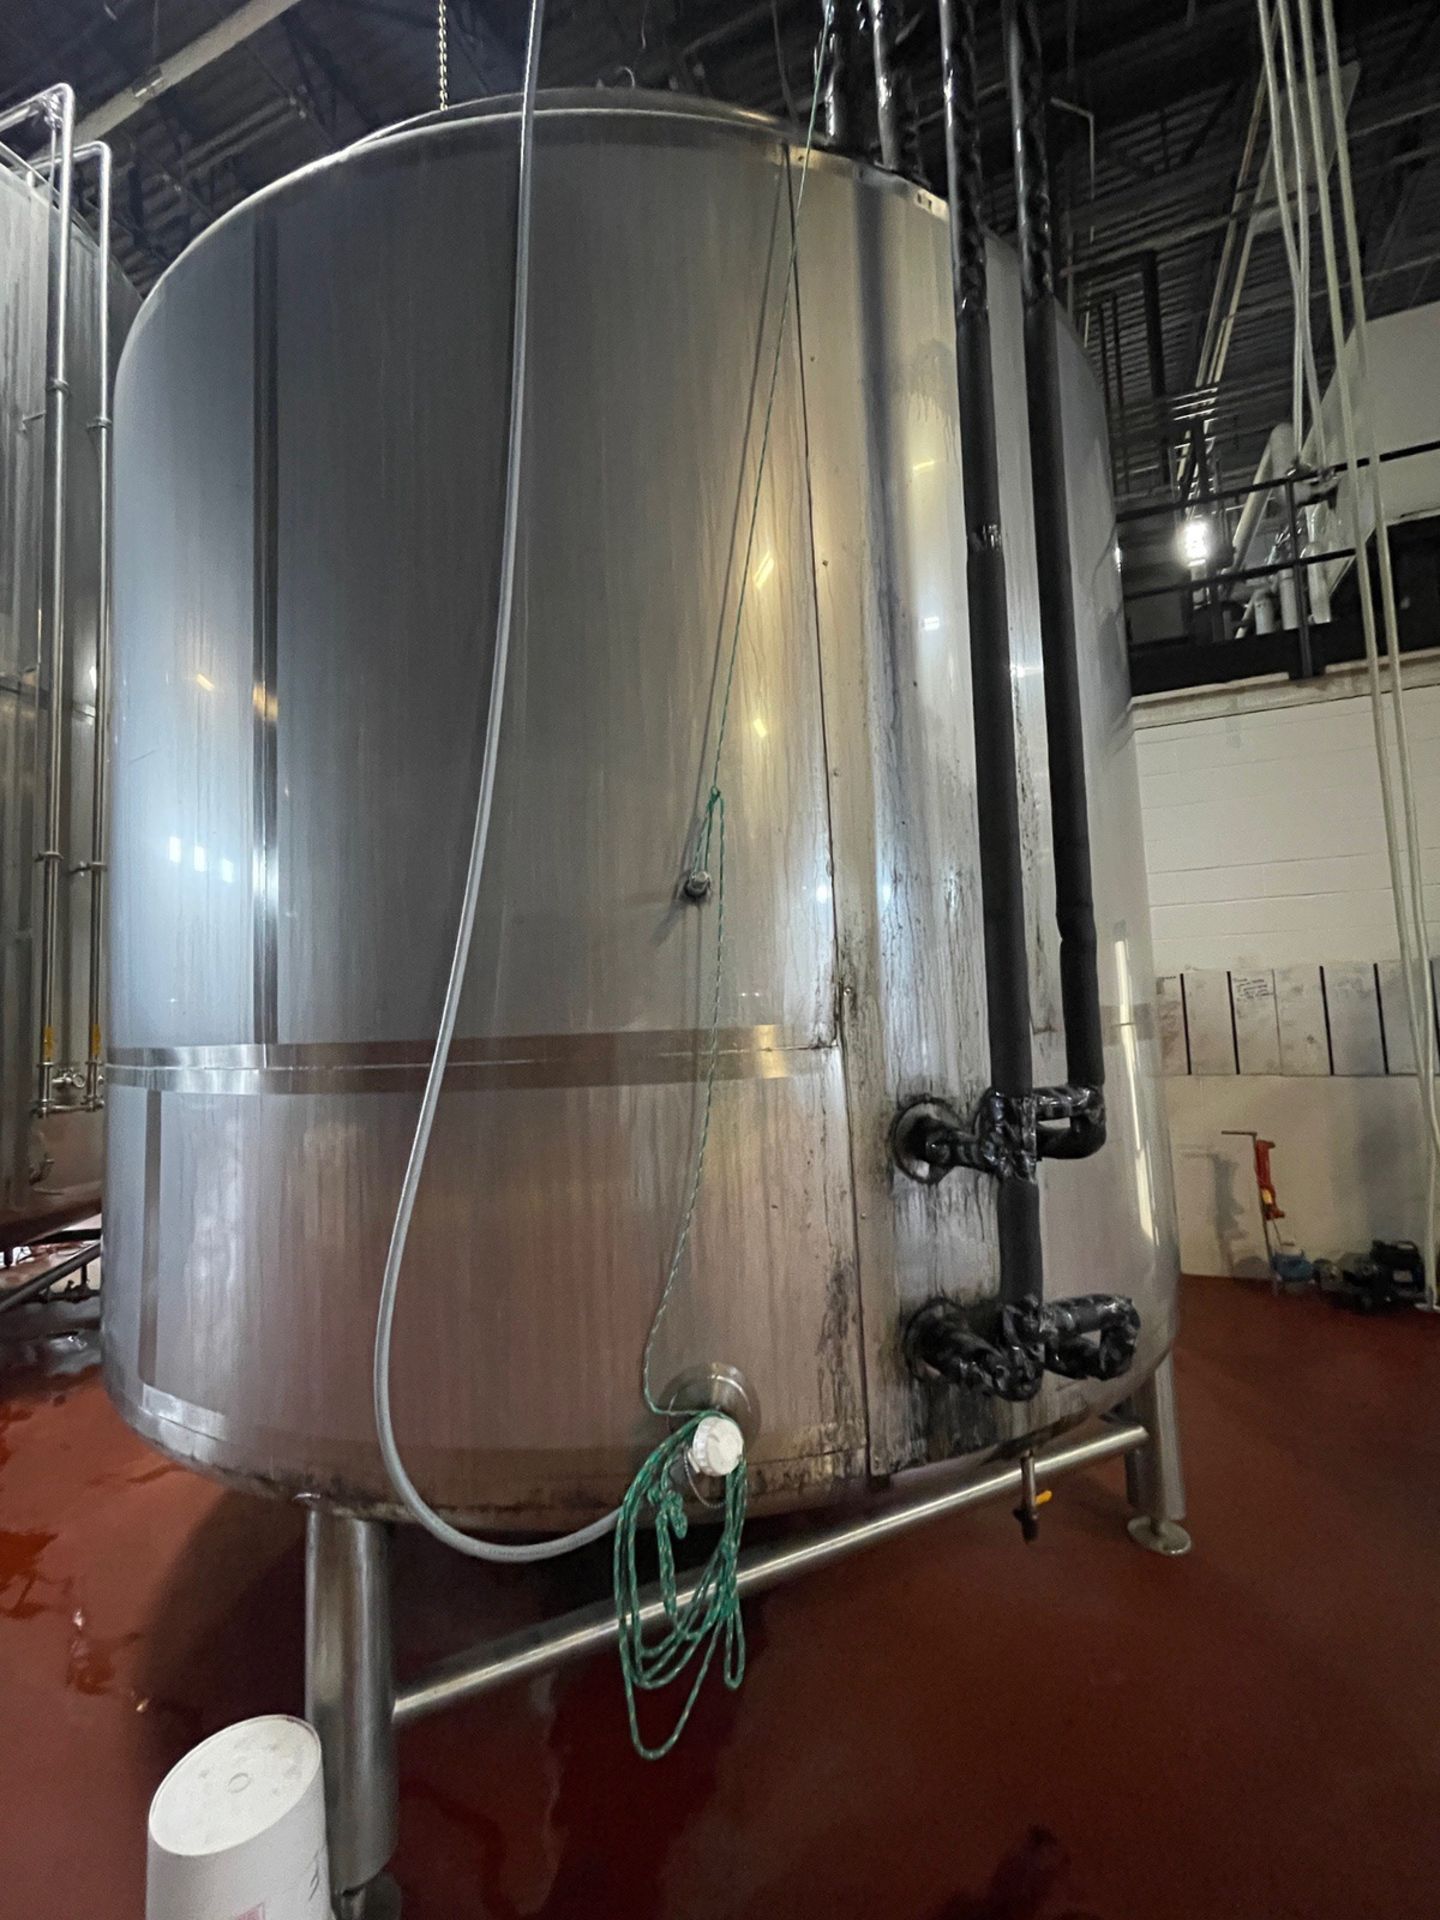 Quality Tank 200 BBL Stainless Steel Holding Tank, Glycol Jacketed, Rounded Bottom, | Rig Fee $3000 - Image 2 of 7